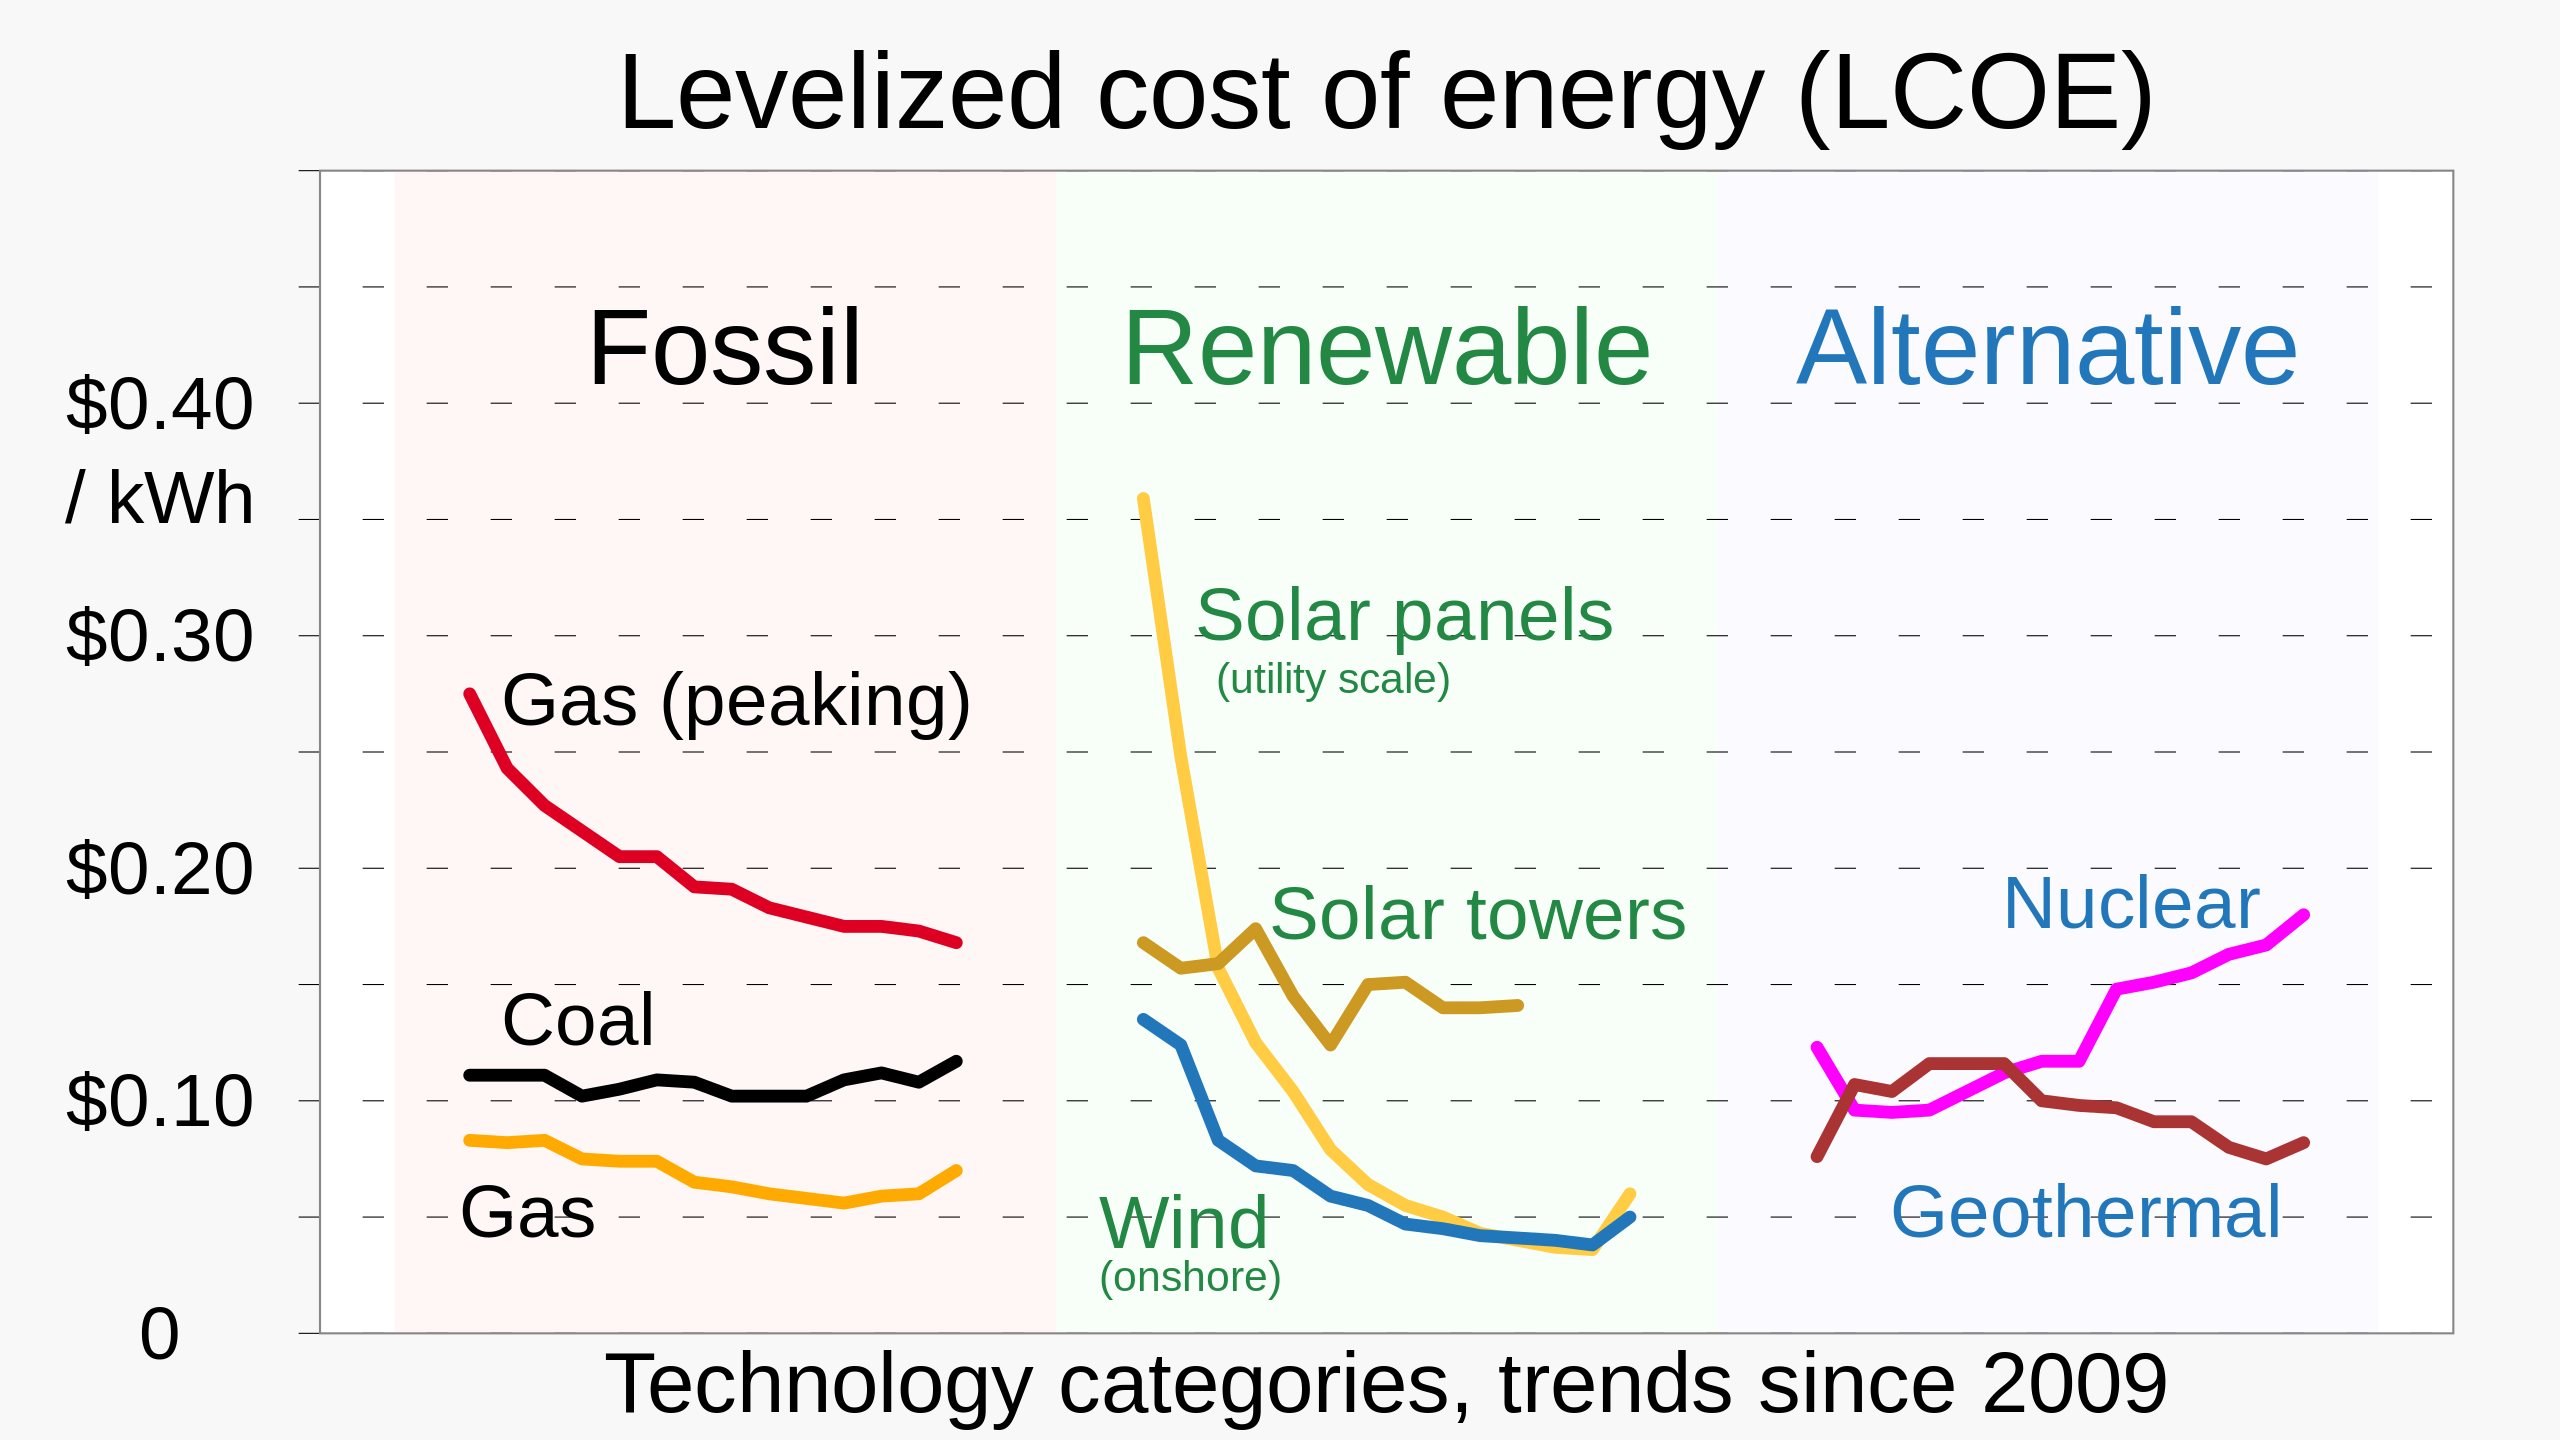 2560px-20201019_Levelized_Cost_of_Energy_%28LCOE%2C_Lazard%29_-_renewable_energy.svg.png